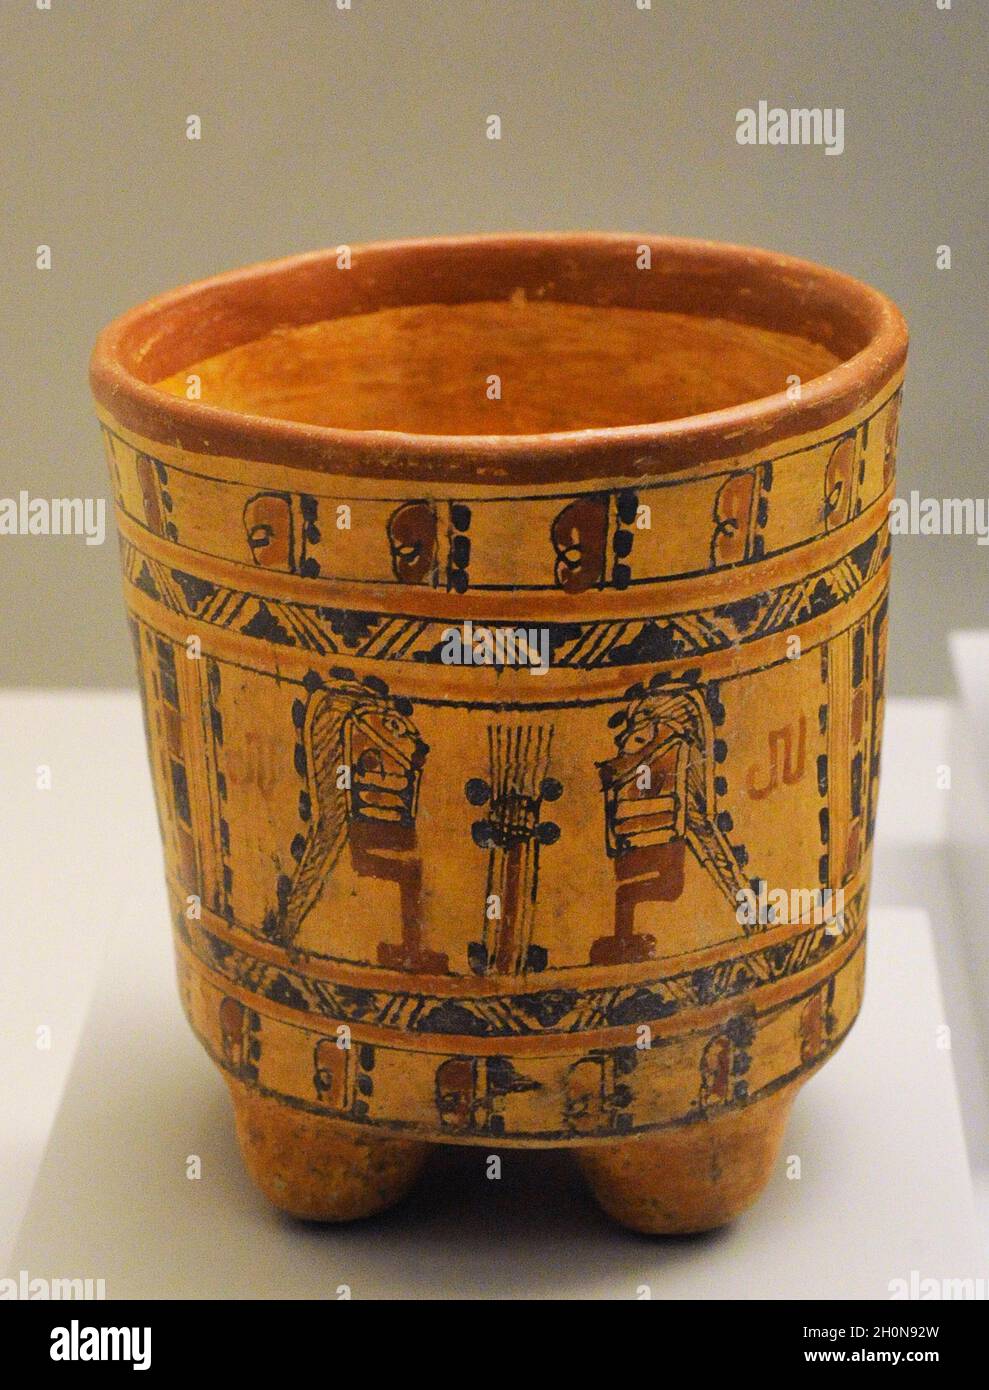 Vase decorated with courtly scenes. Painted ceramics. Maya culture. Late Classic Period (600-900 AD). Mesoamerica. Maya region. Museum of the Americas Stock Photo